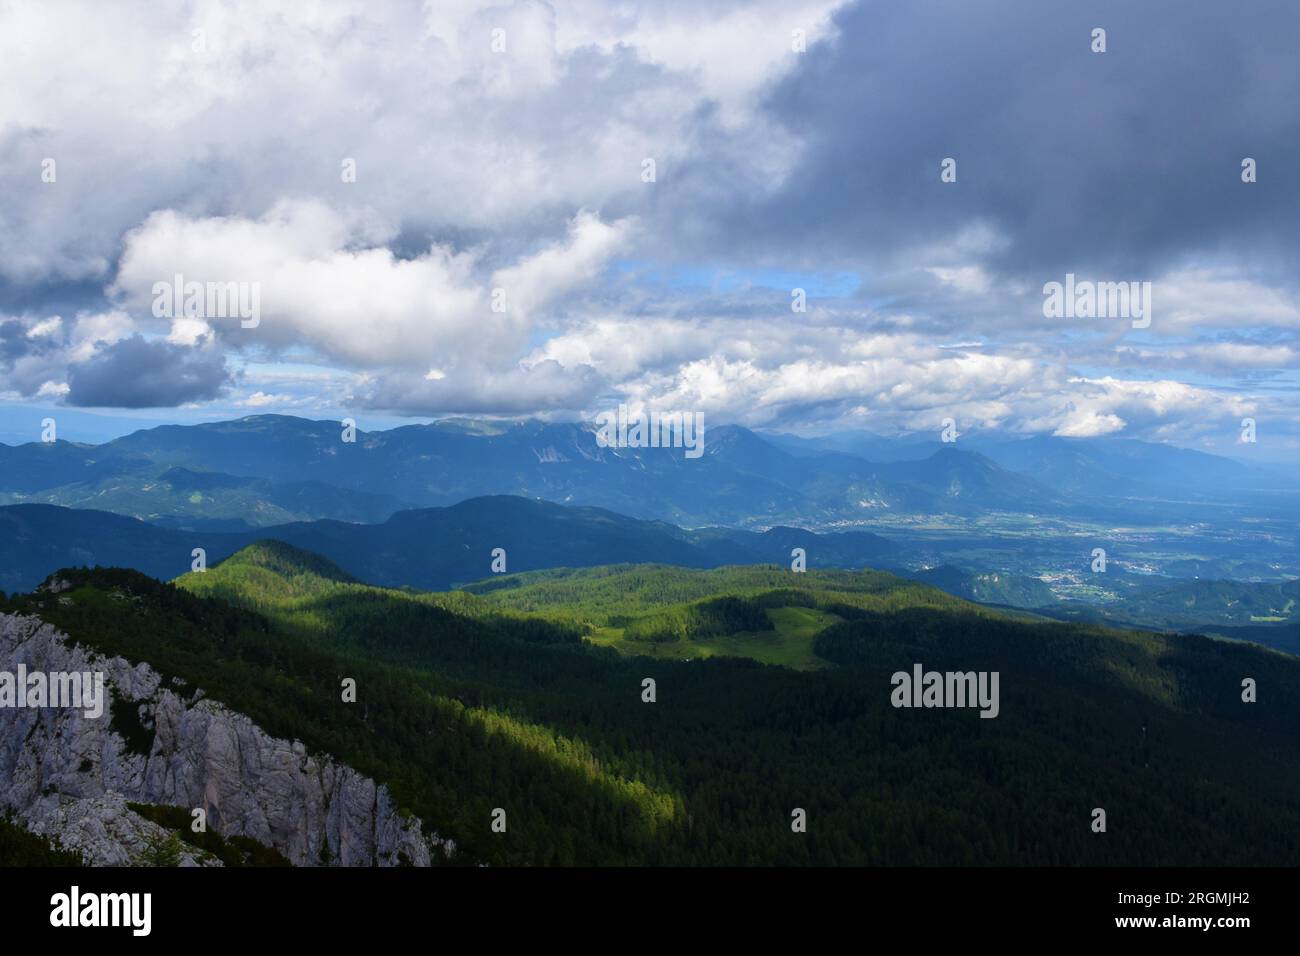 Scenic view of Gorenjska region of Slovenia and Karavanke mountain with clouds above and Pokljuka plateau in front Stock Photo